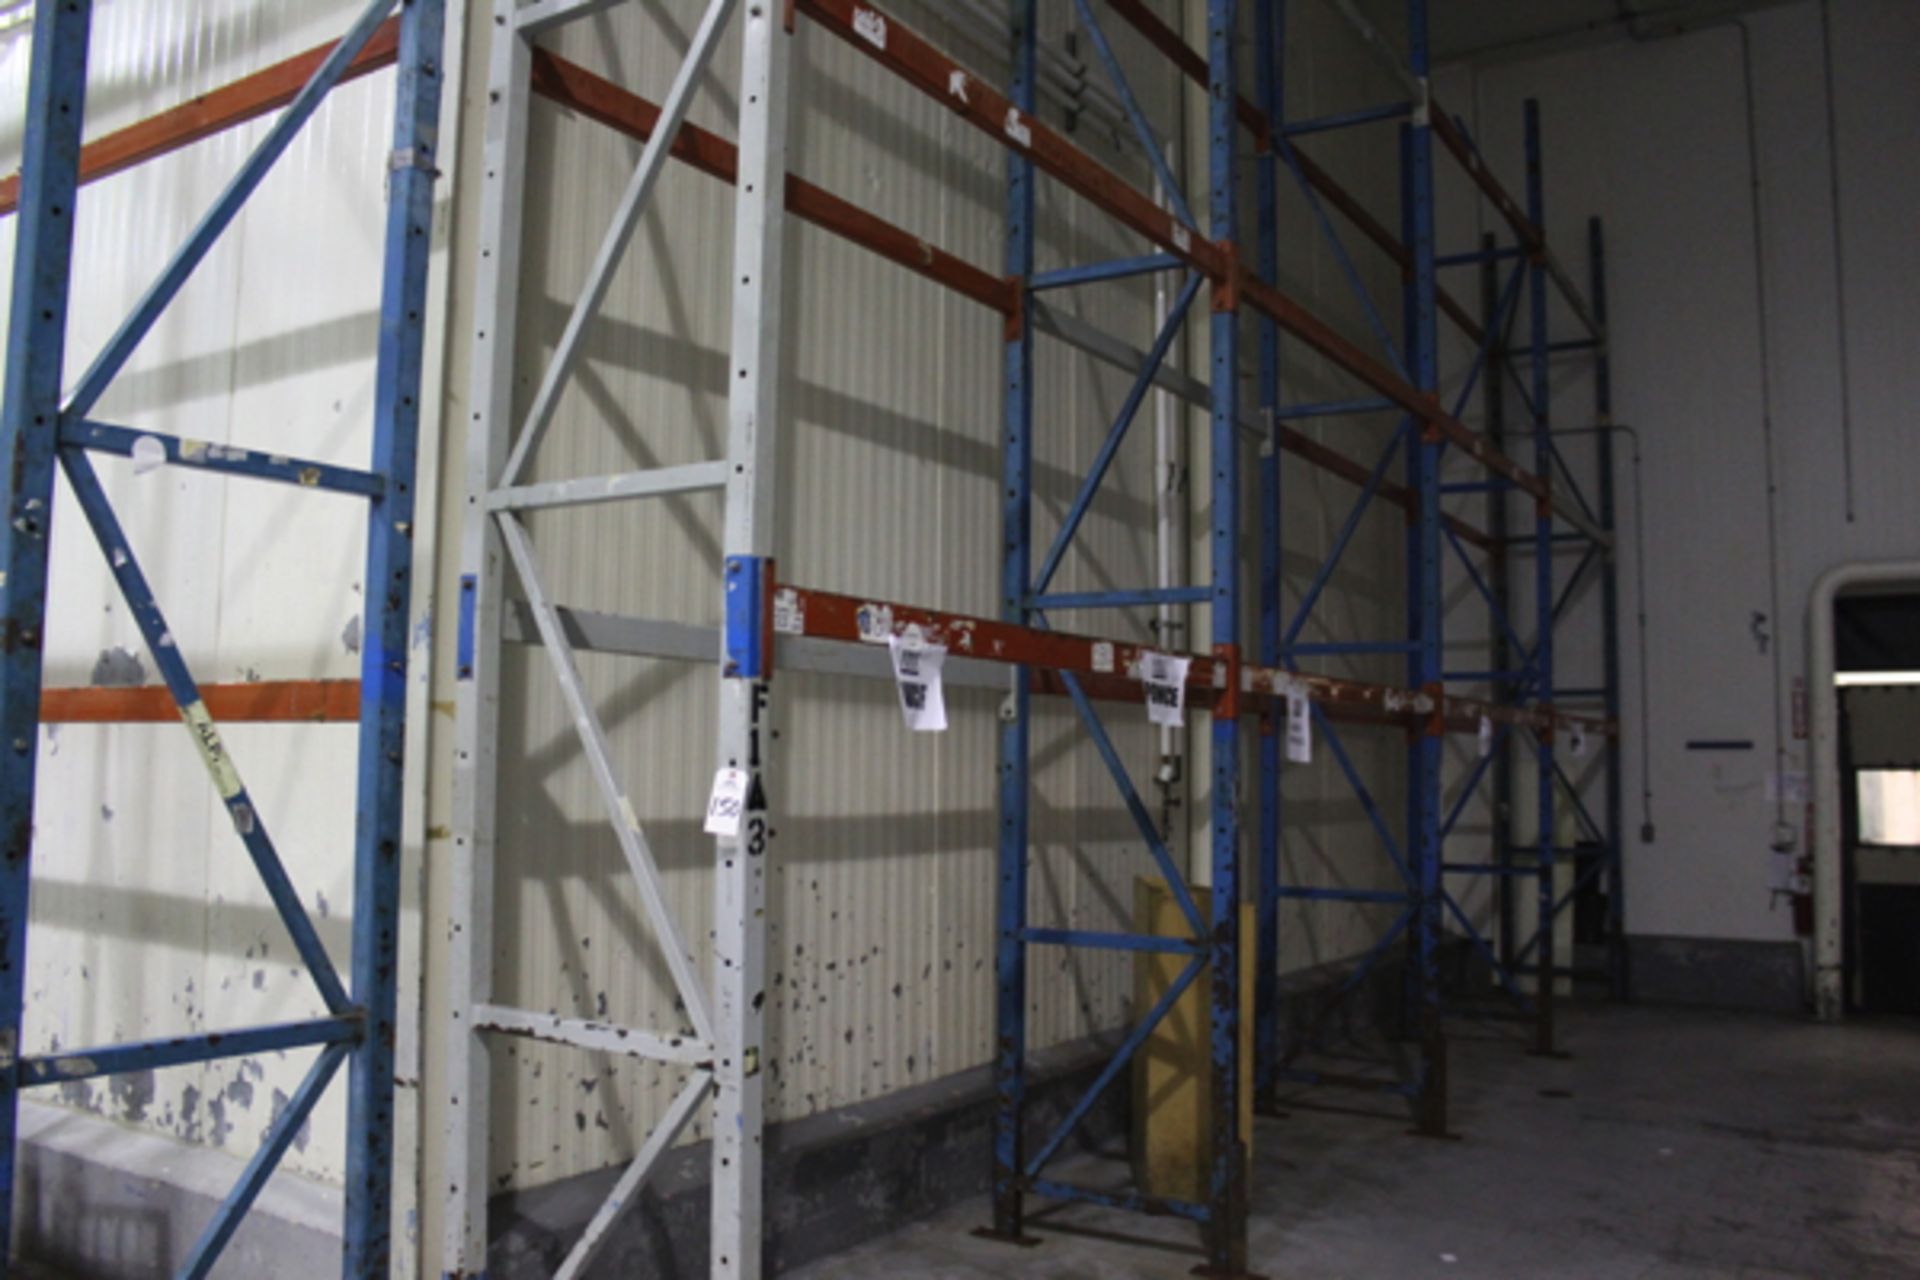 Lot of Pallet Racking, (29) 36" X 18' Uprights, (130) 8' Beams | Rigging Price: $950